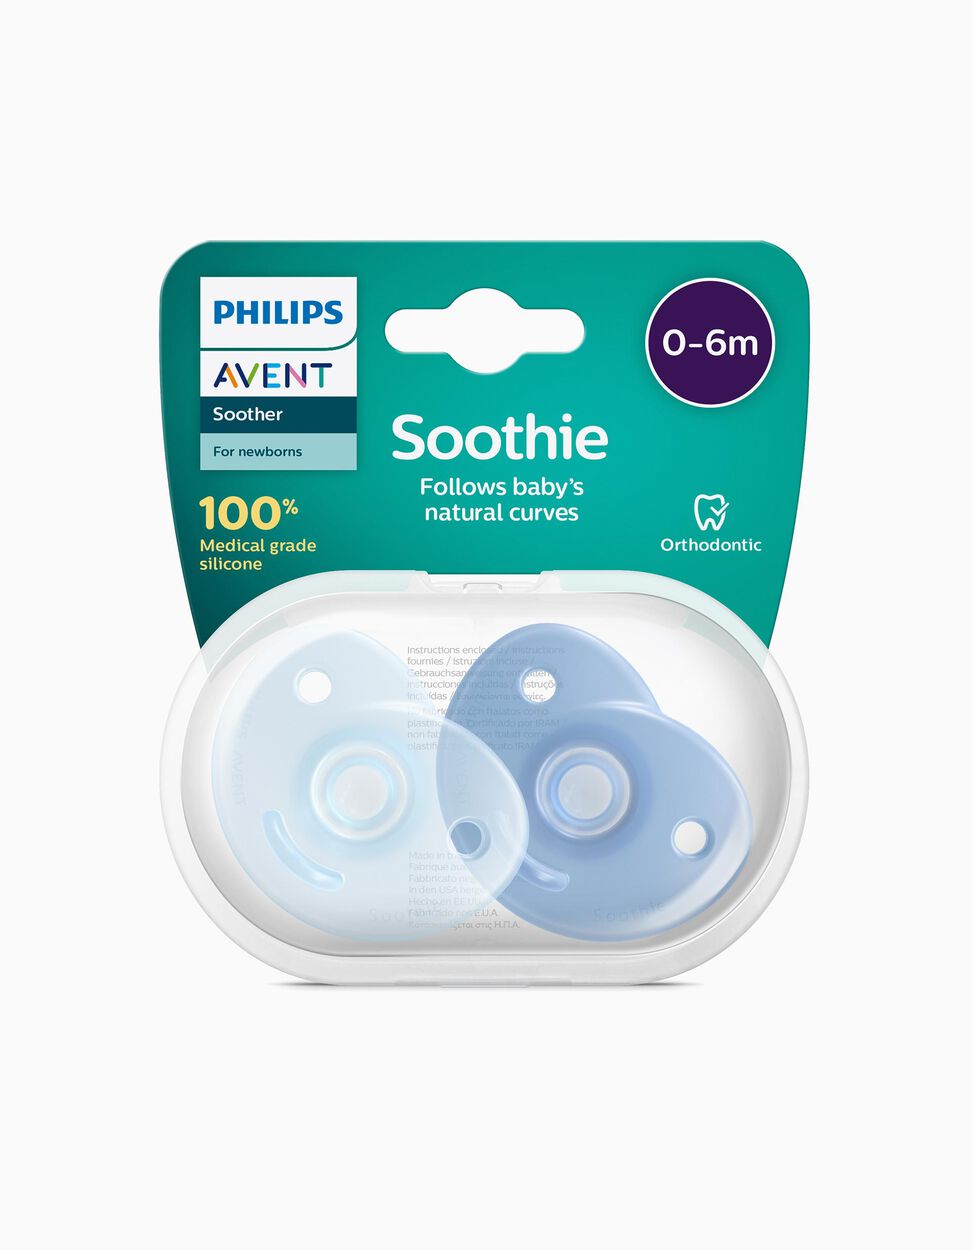 Philips Avent 2 Chupetes Decorados 0 A 6 Meses